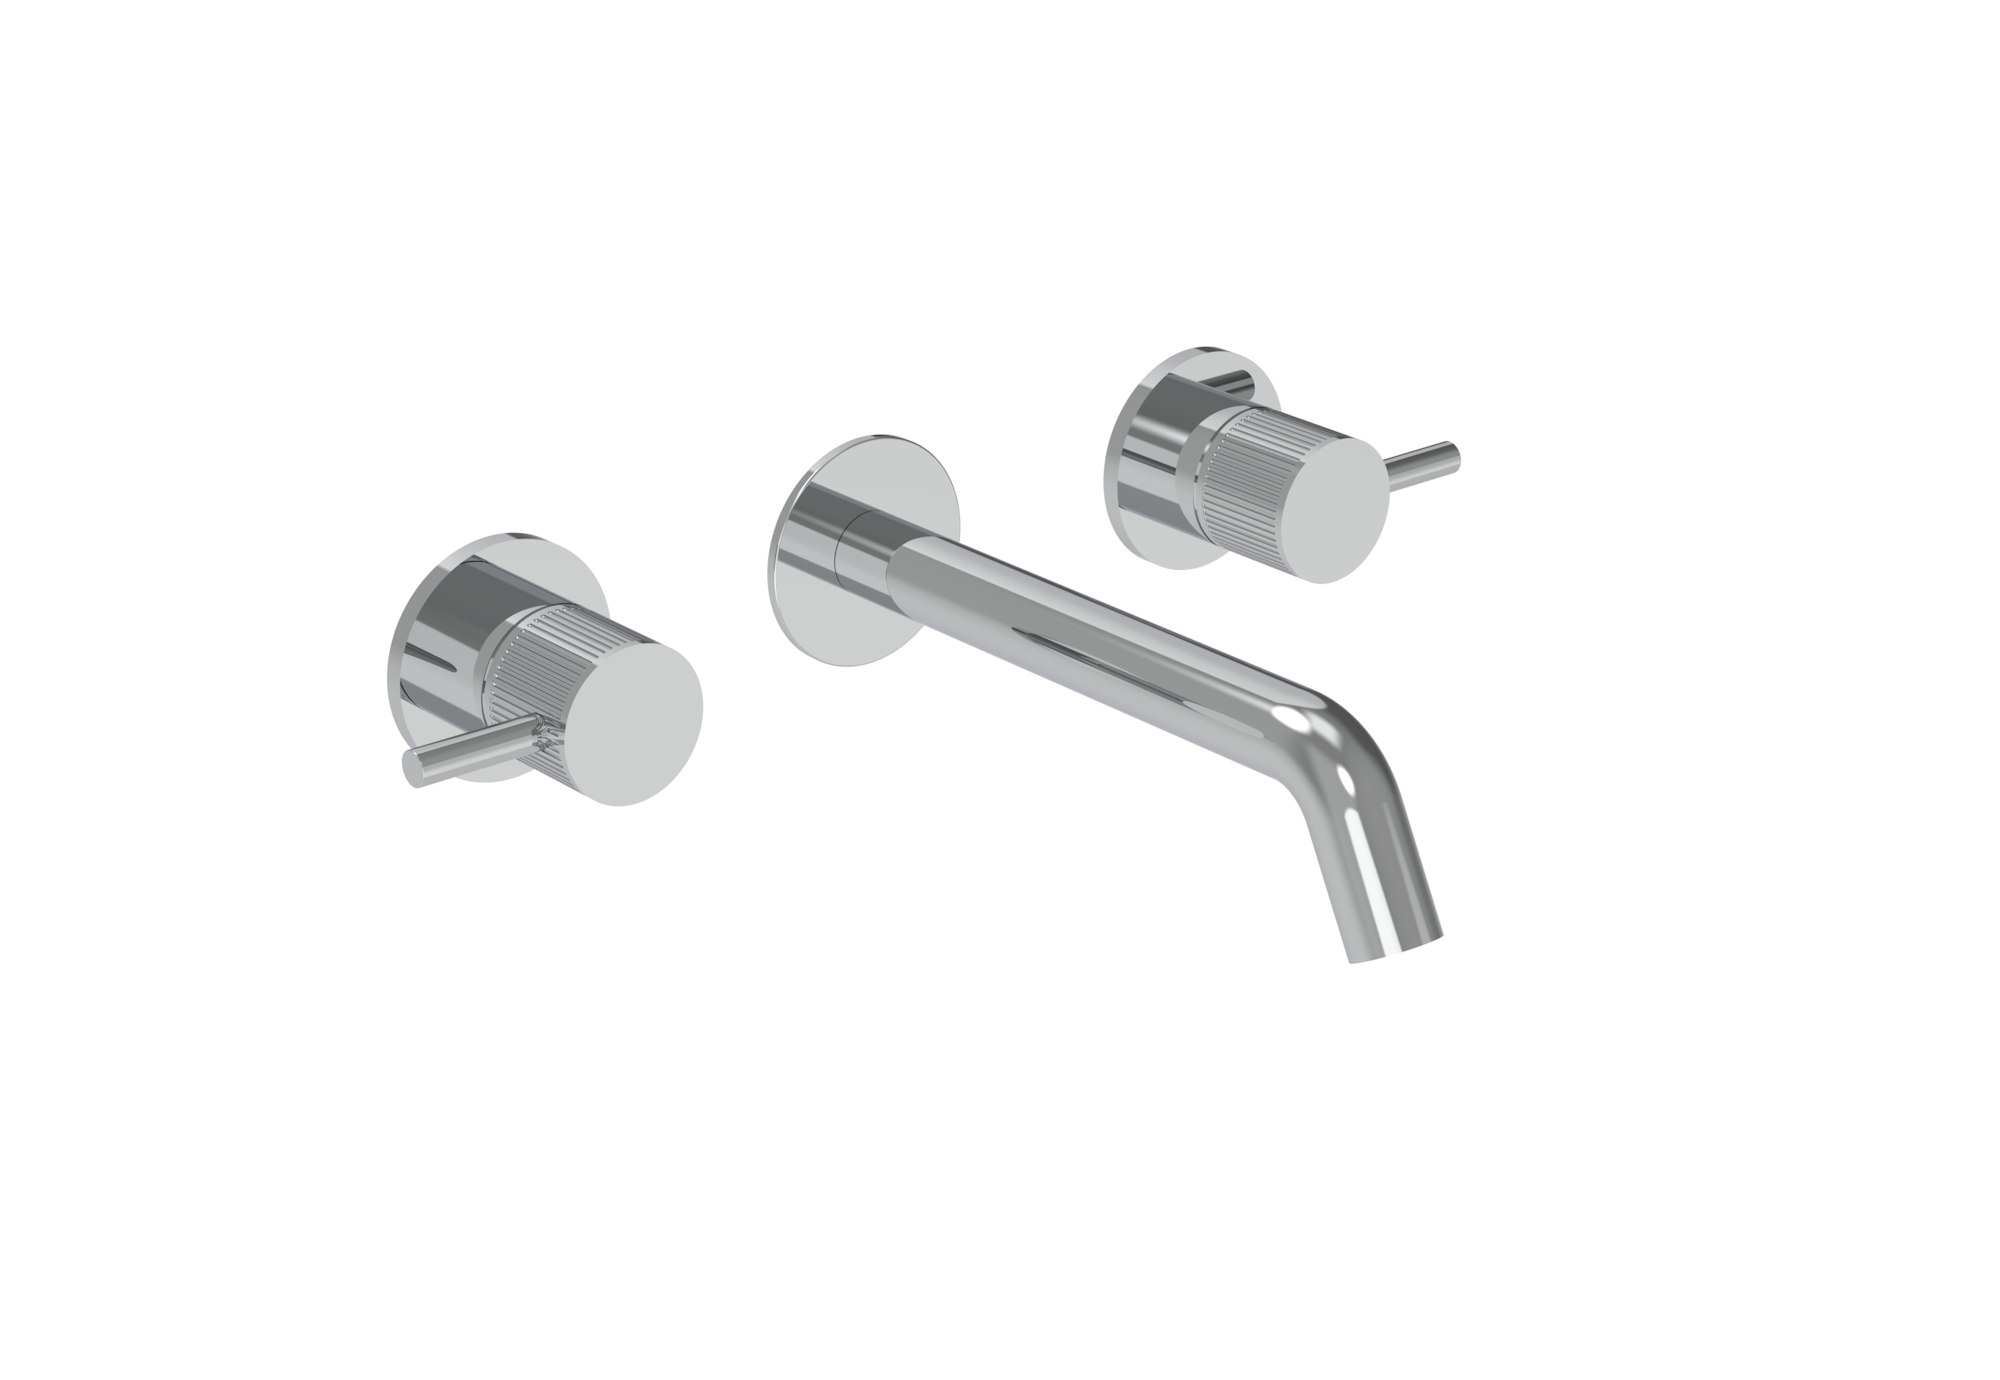 COS 3 Tap Hole Wall mounted KIT - w/ Classic spout (170mm) w/ Fluted handle - Chrome